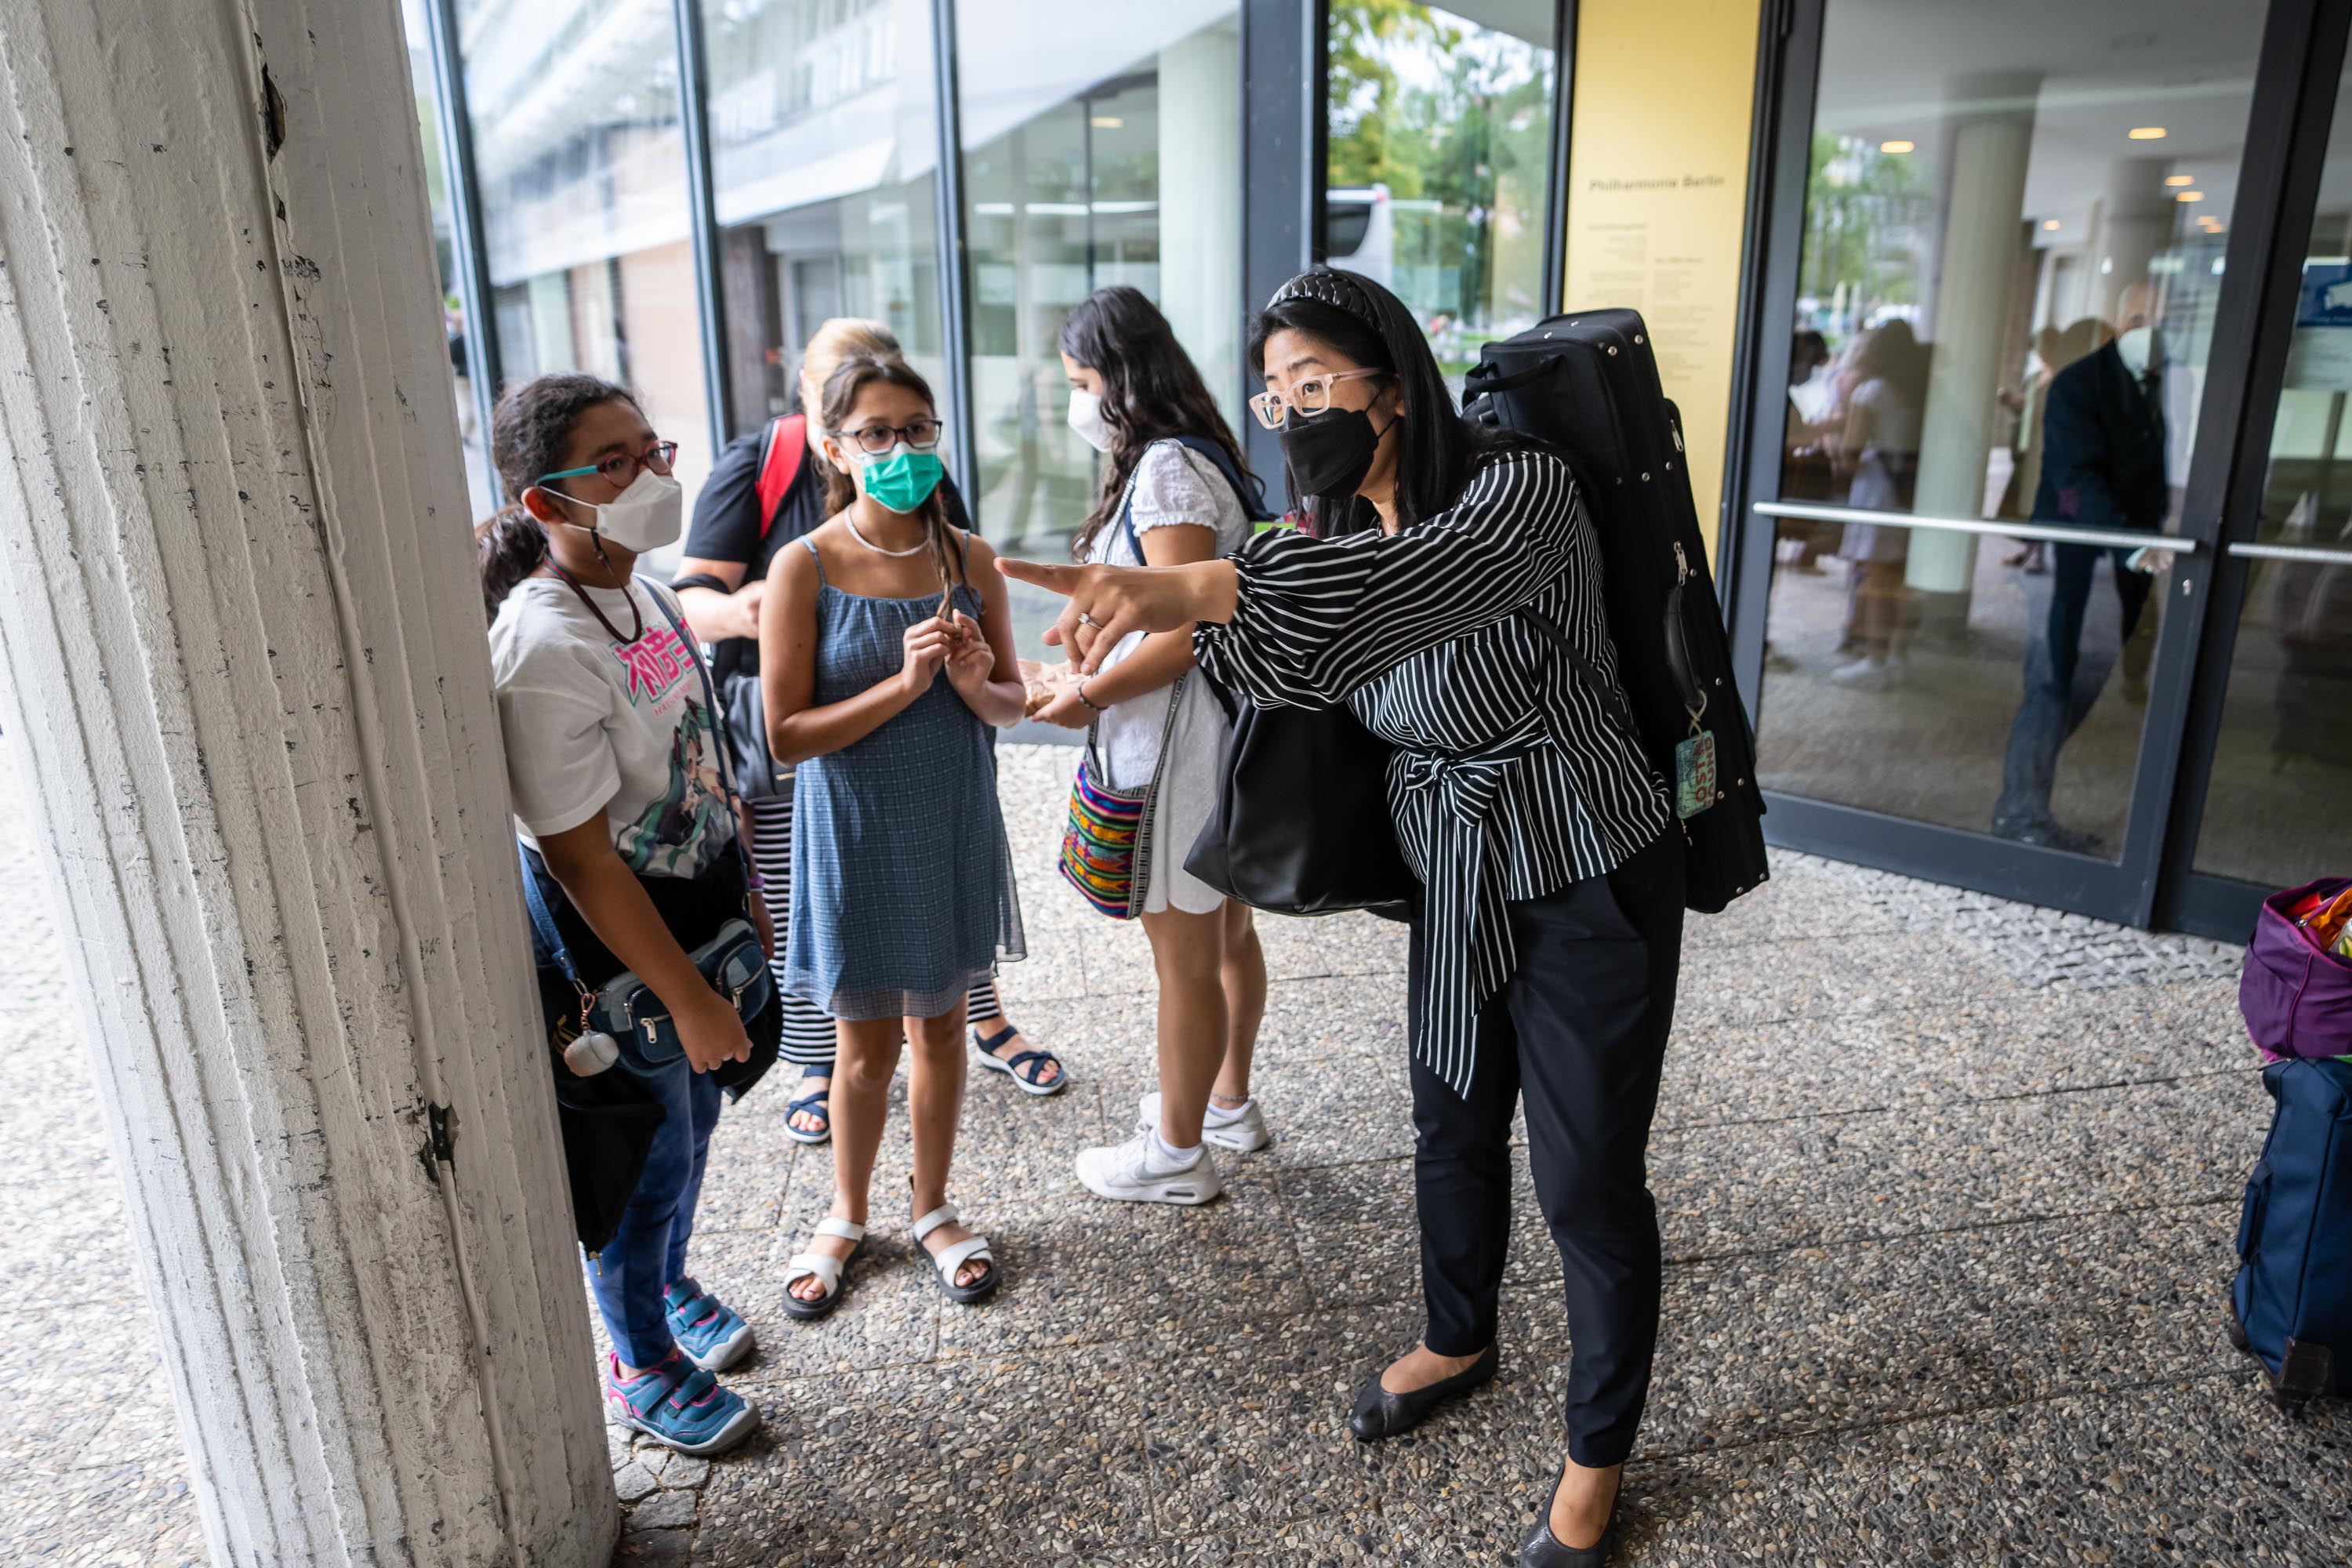 Violinist Amy Oshiro-Morales shows her daughter and niece where to meet outside the concert hall following the performance